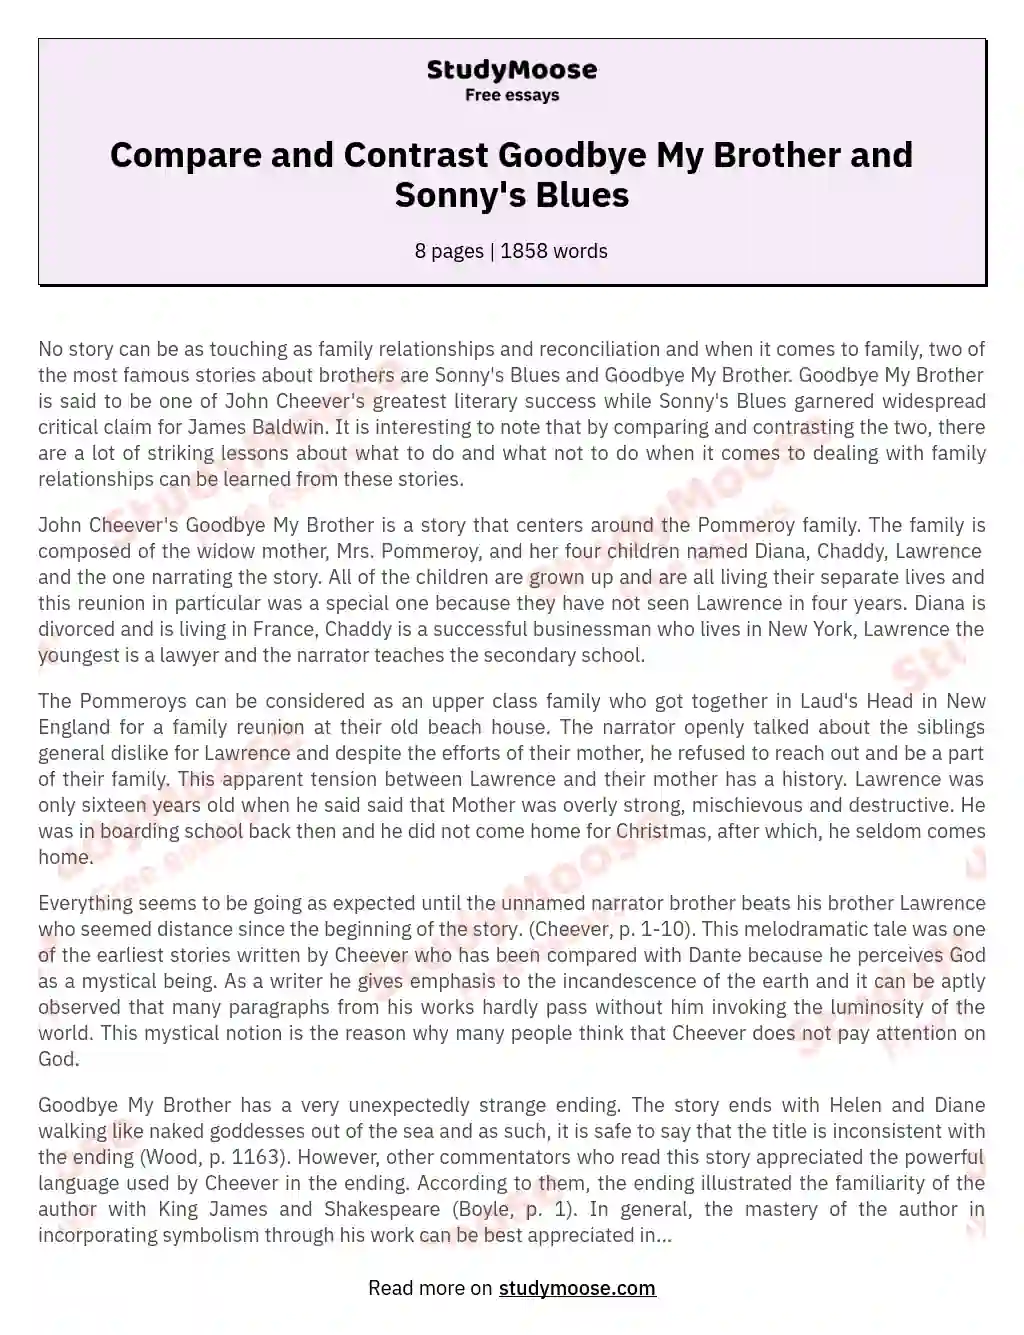 Compare and Contrast Goodbye My Brother and Sonny's Blues essay